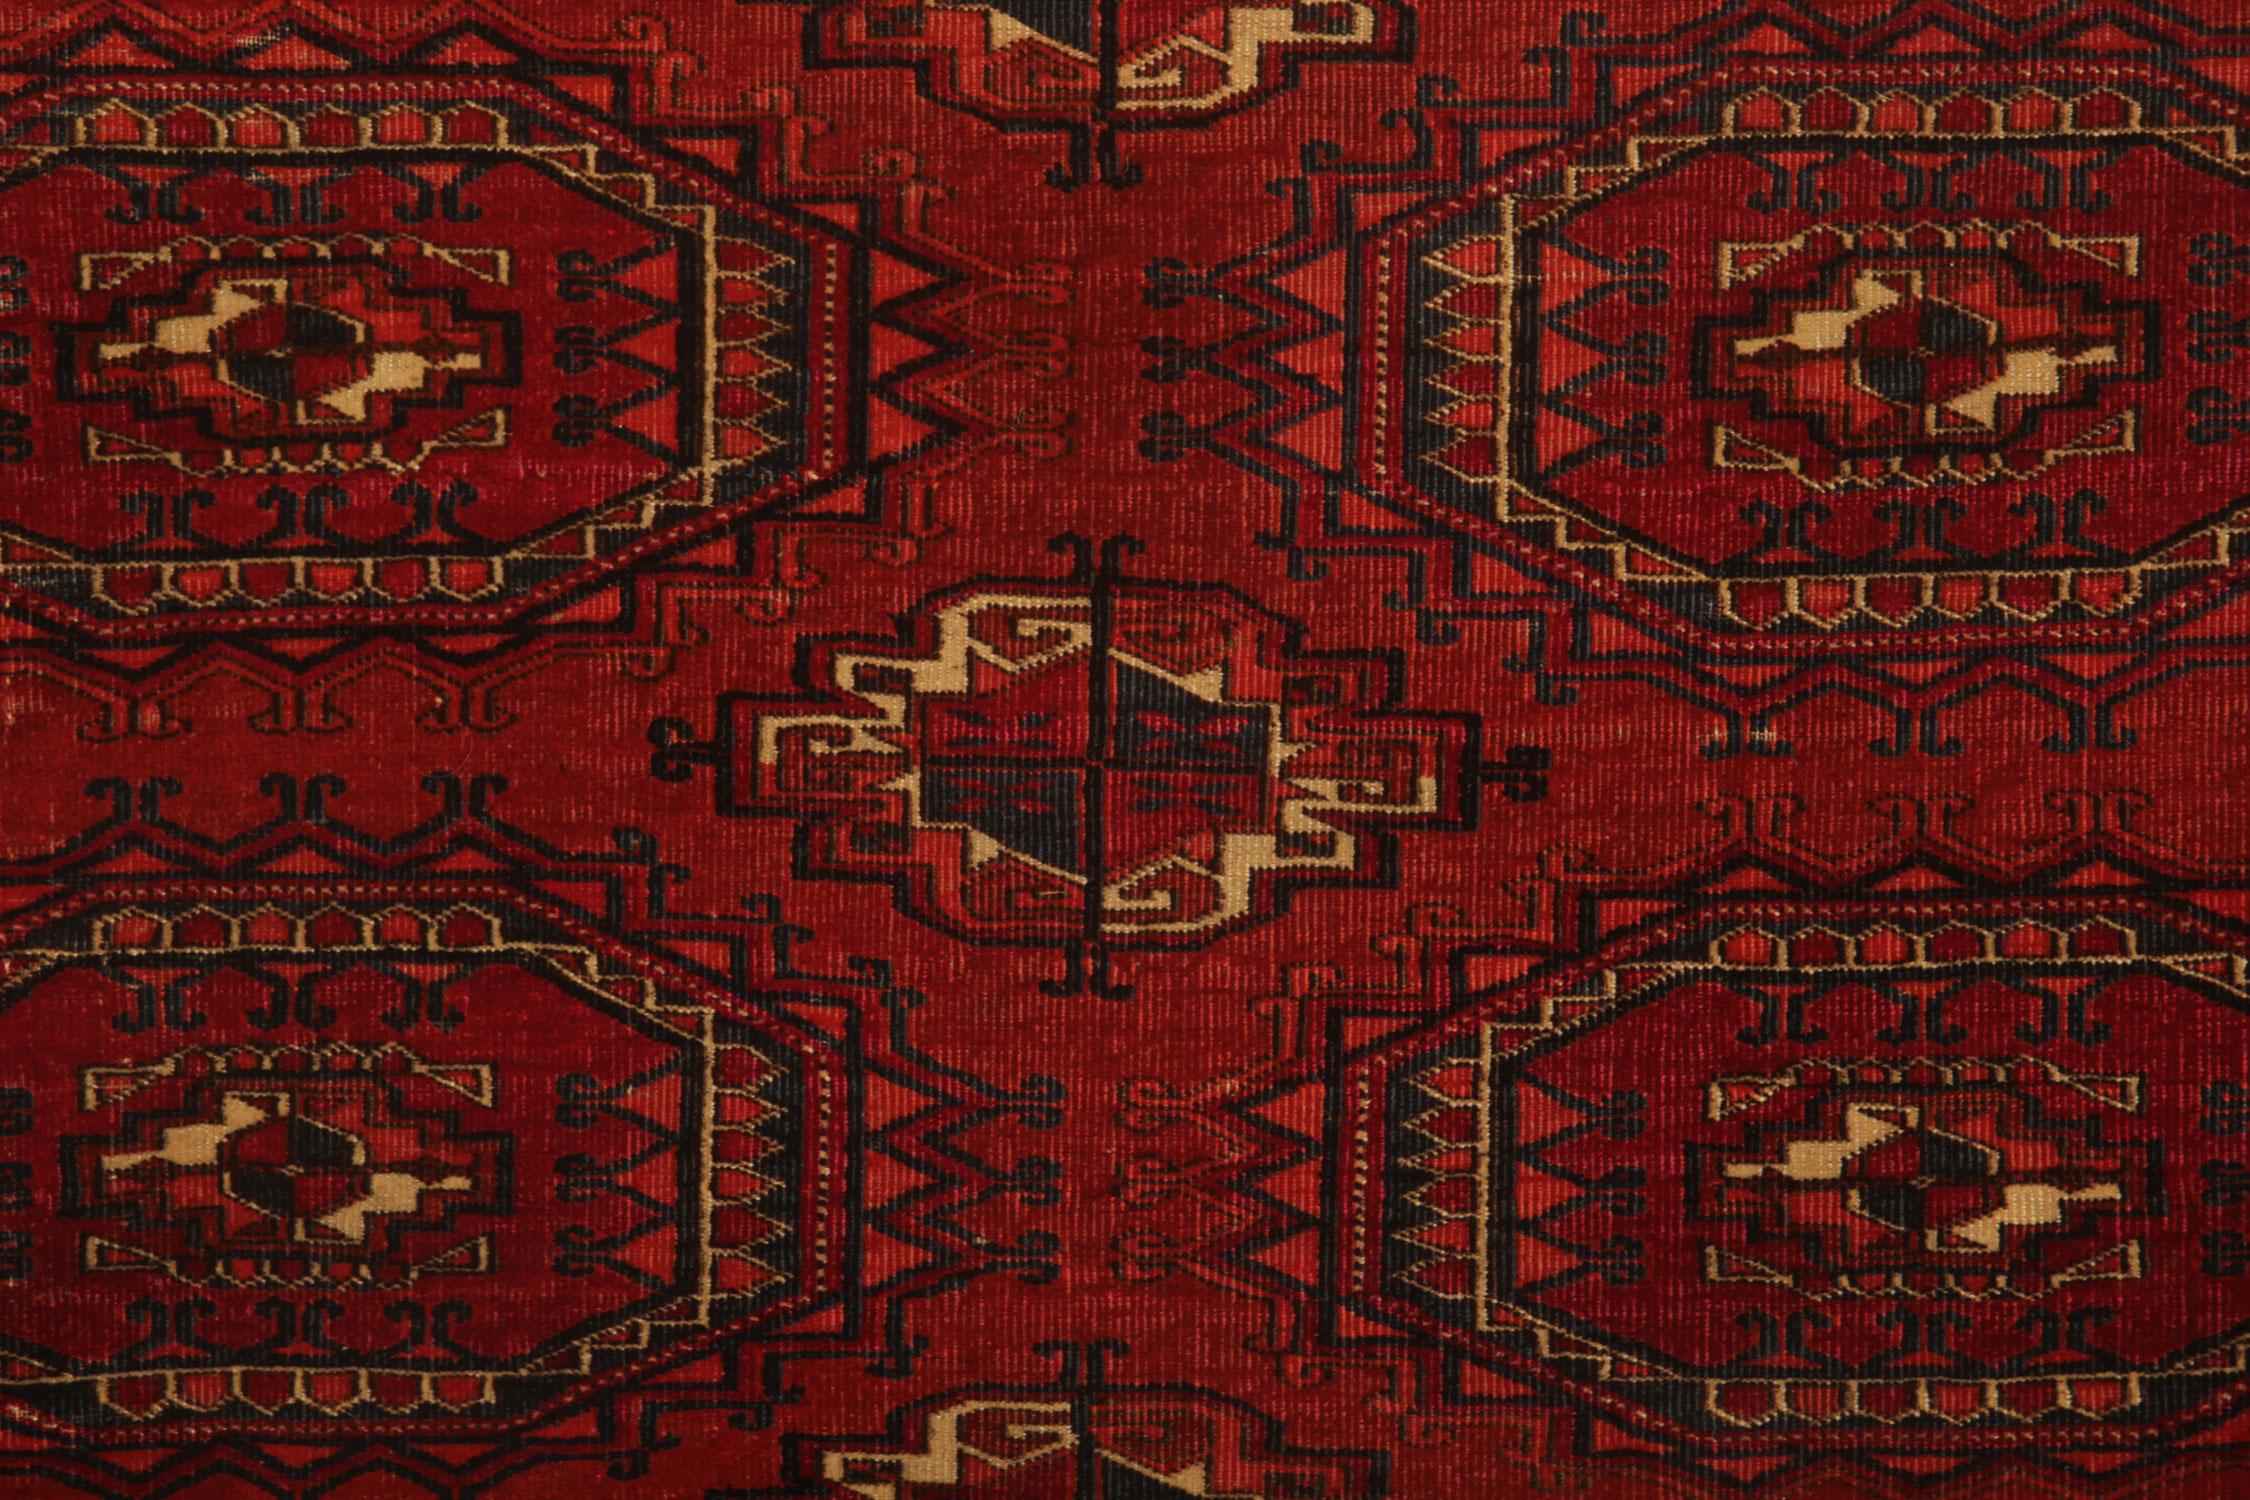 This handmade carpet oriental rug is antique Turkmen hand-woven wool rug was made using traditional vegetable dyes and handmade by the Turkmen tribespeople. This Rug is predominantly red in colour and has a repeated motif pattern covering the rug.